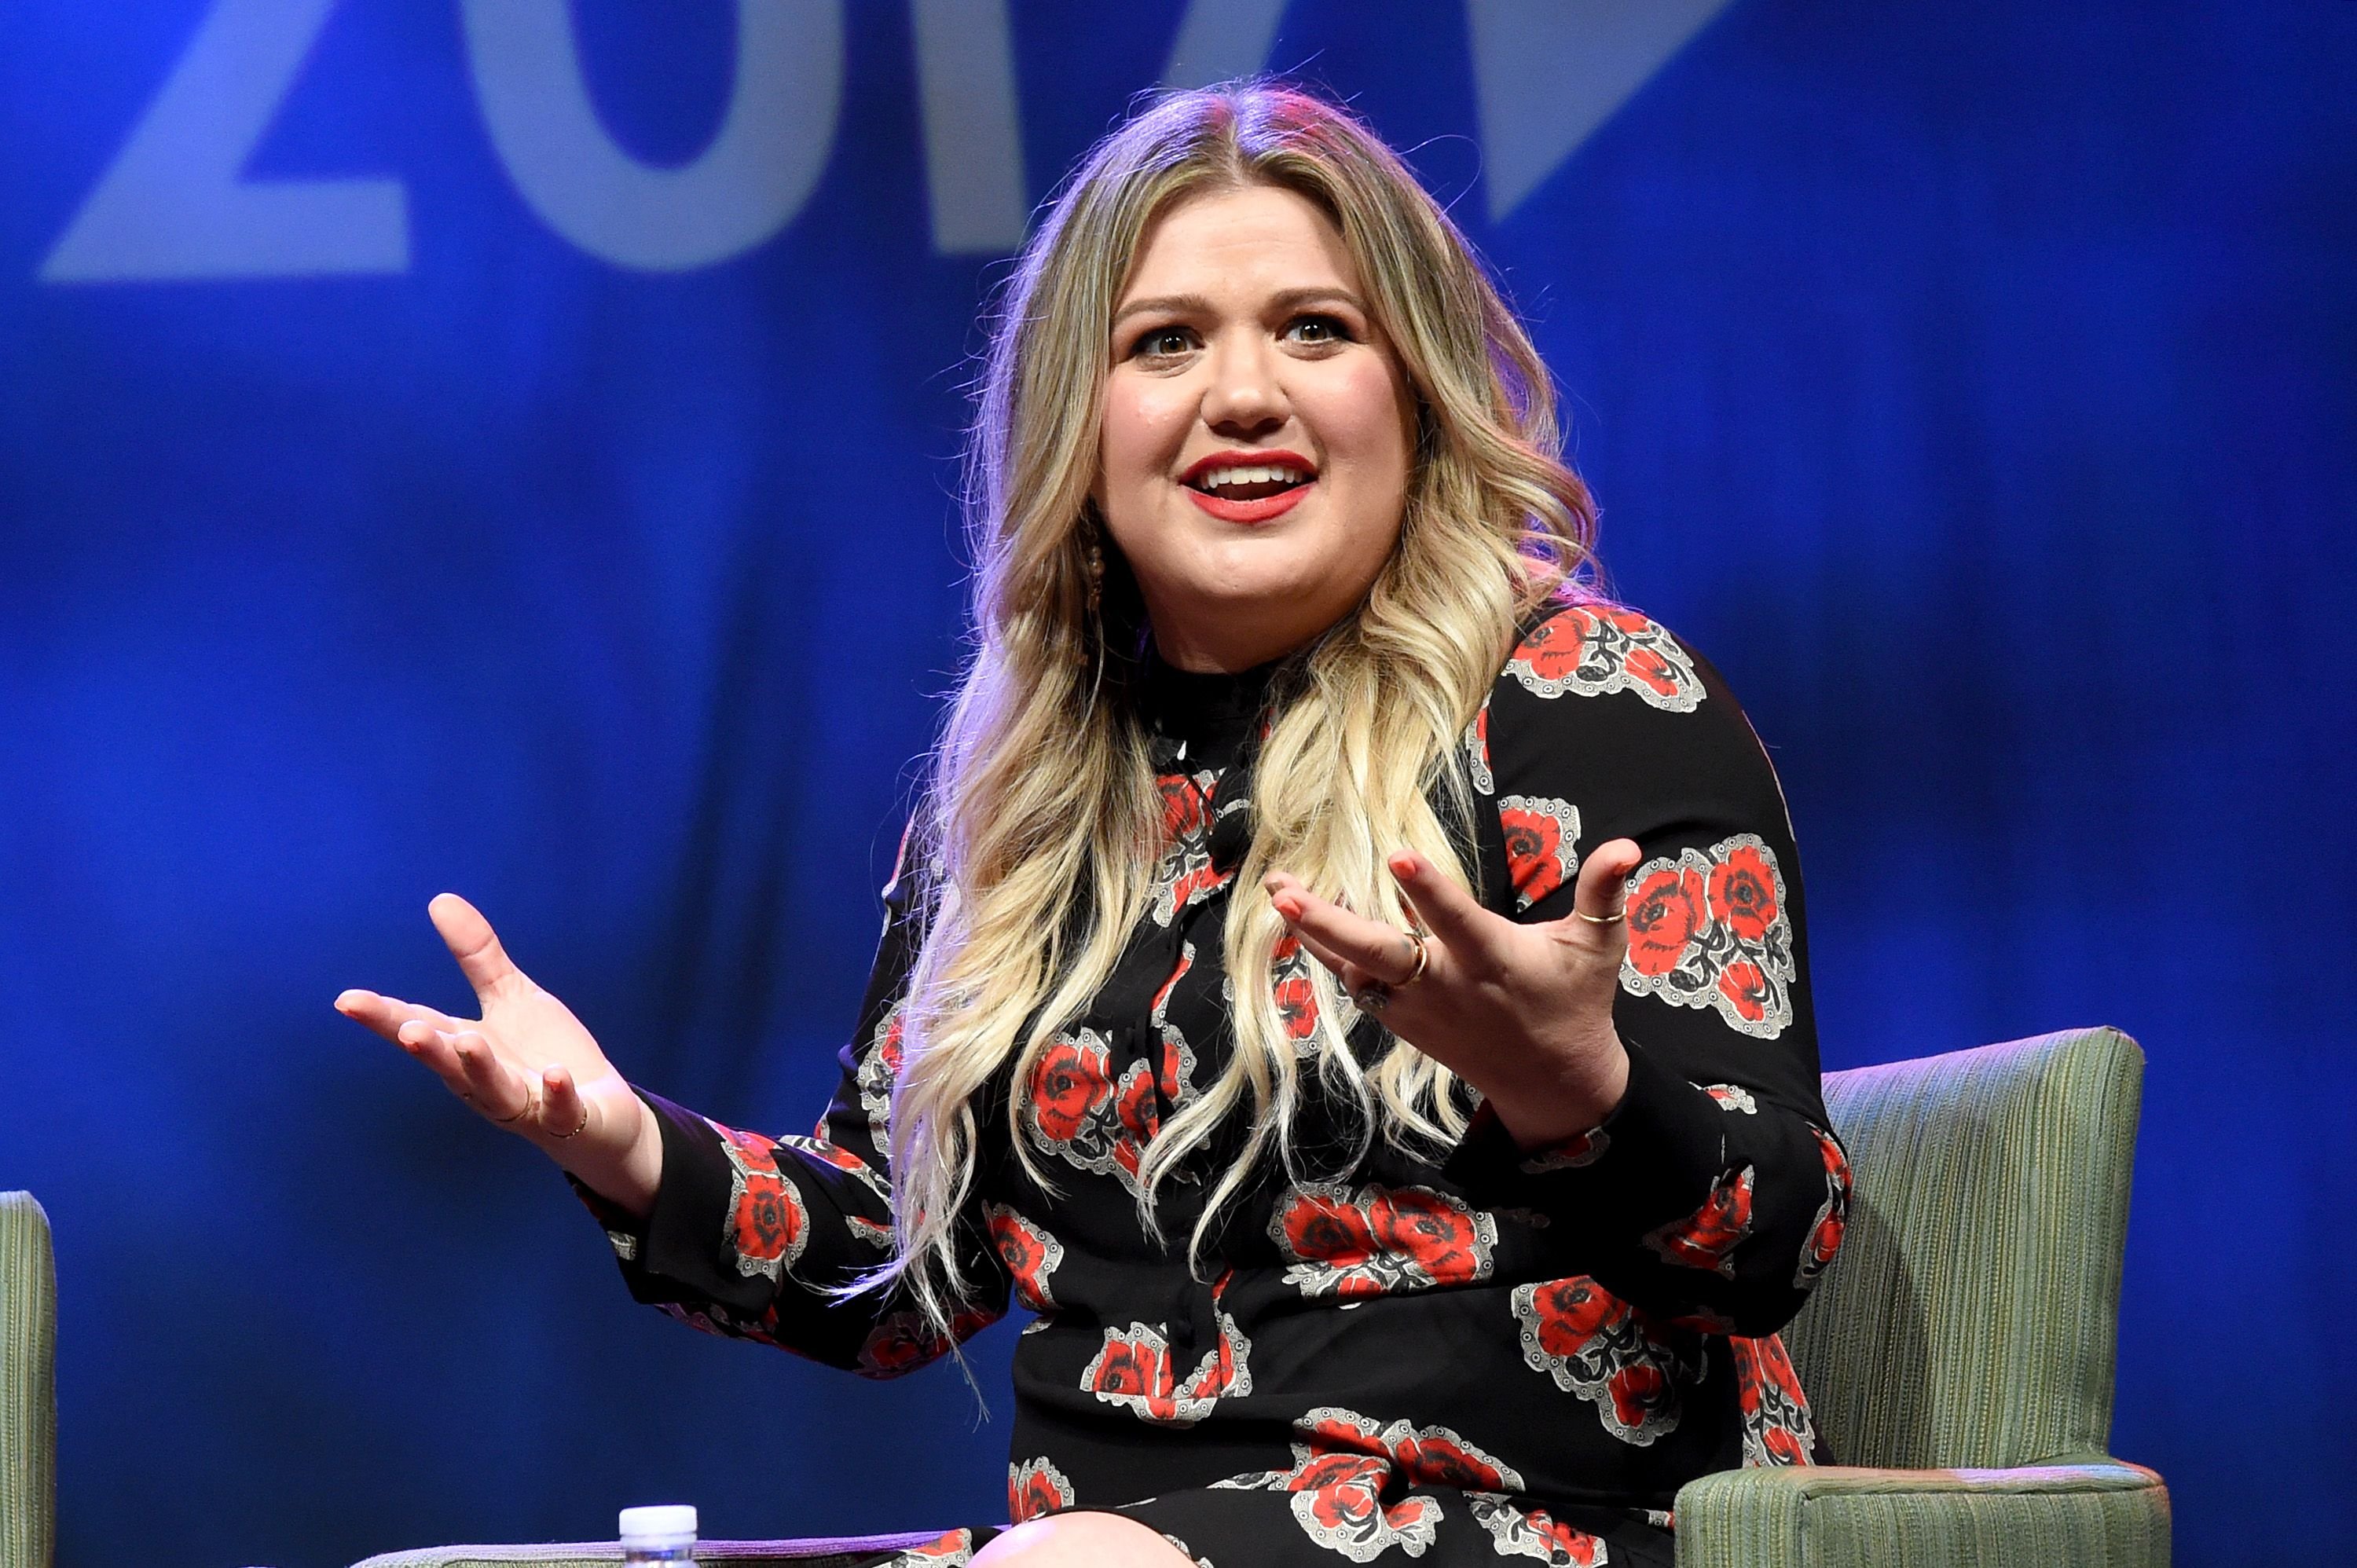 Singer-songwriter Kelly Clarkson spoke at the Featured Presentation: Music's Leading Ladies Speak Out at Renaissance Nashville Hotel on May 16, 2017 in Nashville, Tennessee | Photo: Getty Images